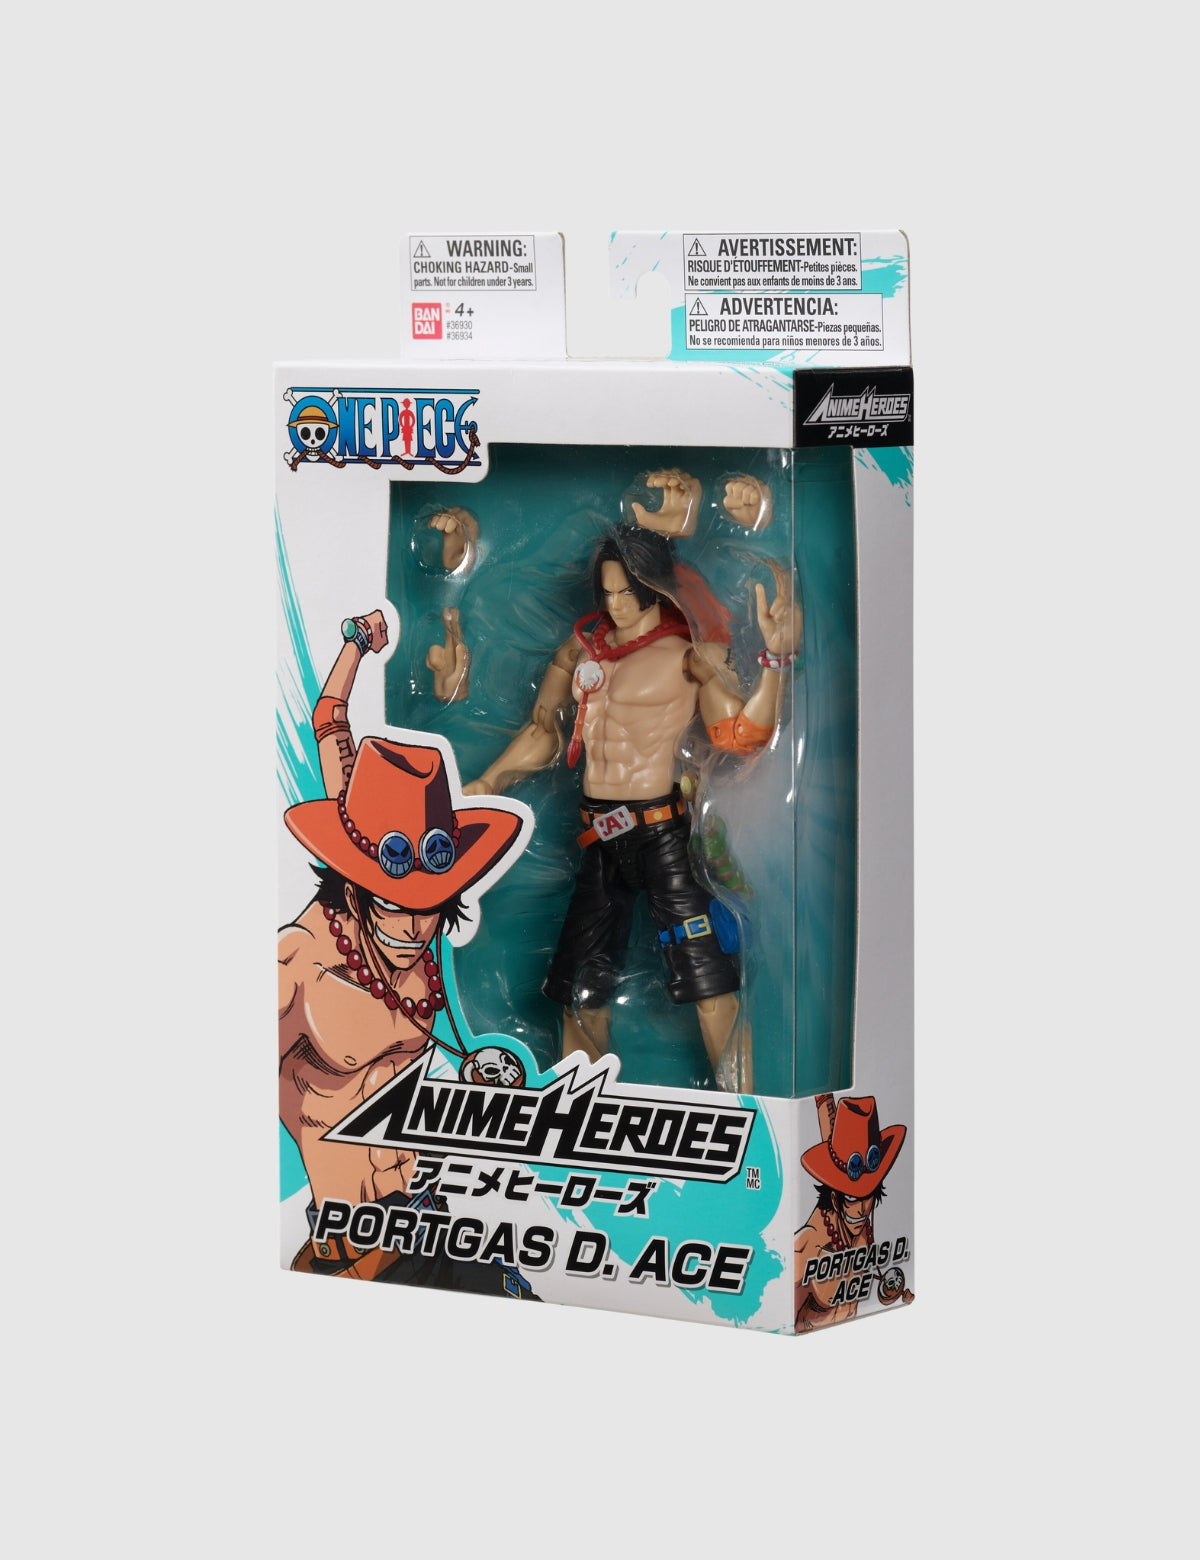 qusgdbjskfi New One Piece Anime Figure GK Portgas D. Ace Action PVC  Collection Cartoon Model Doll Gift Toys Decoration | Lazada.vn